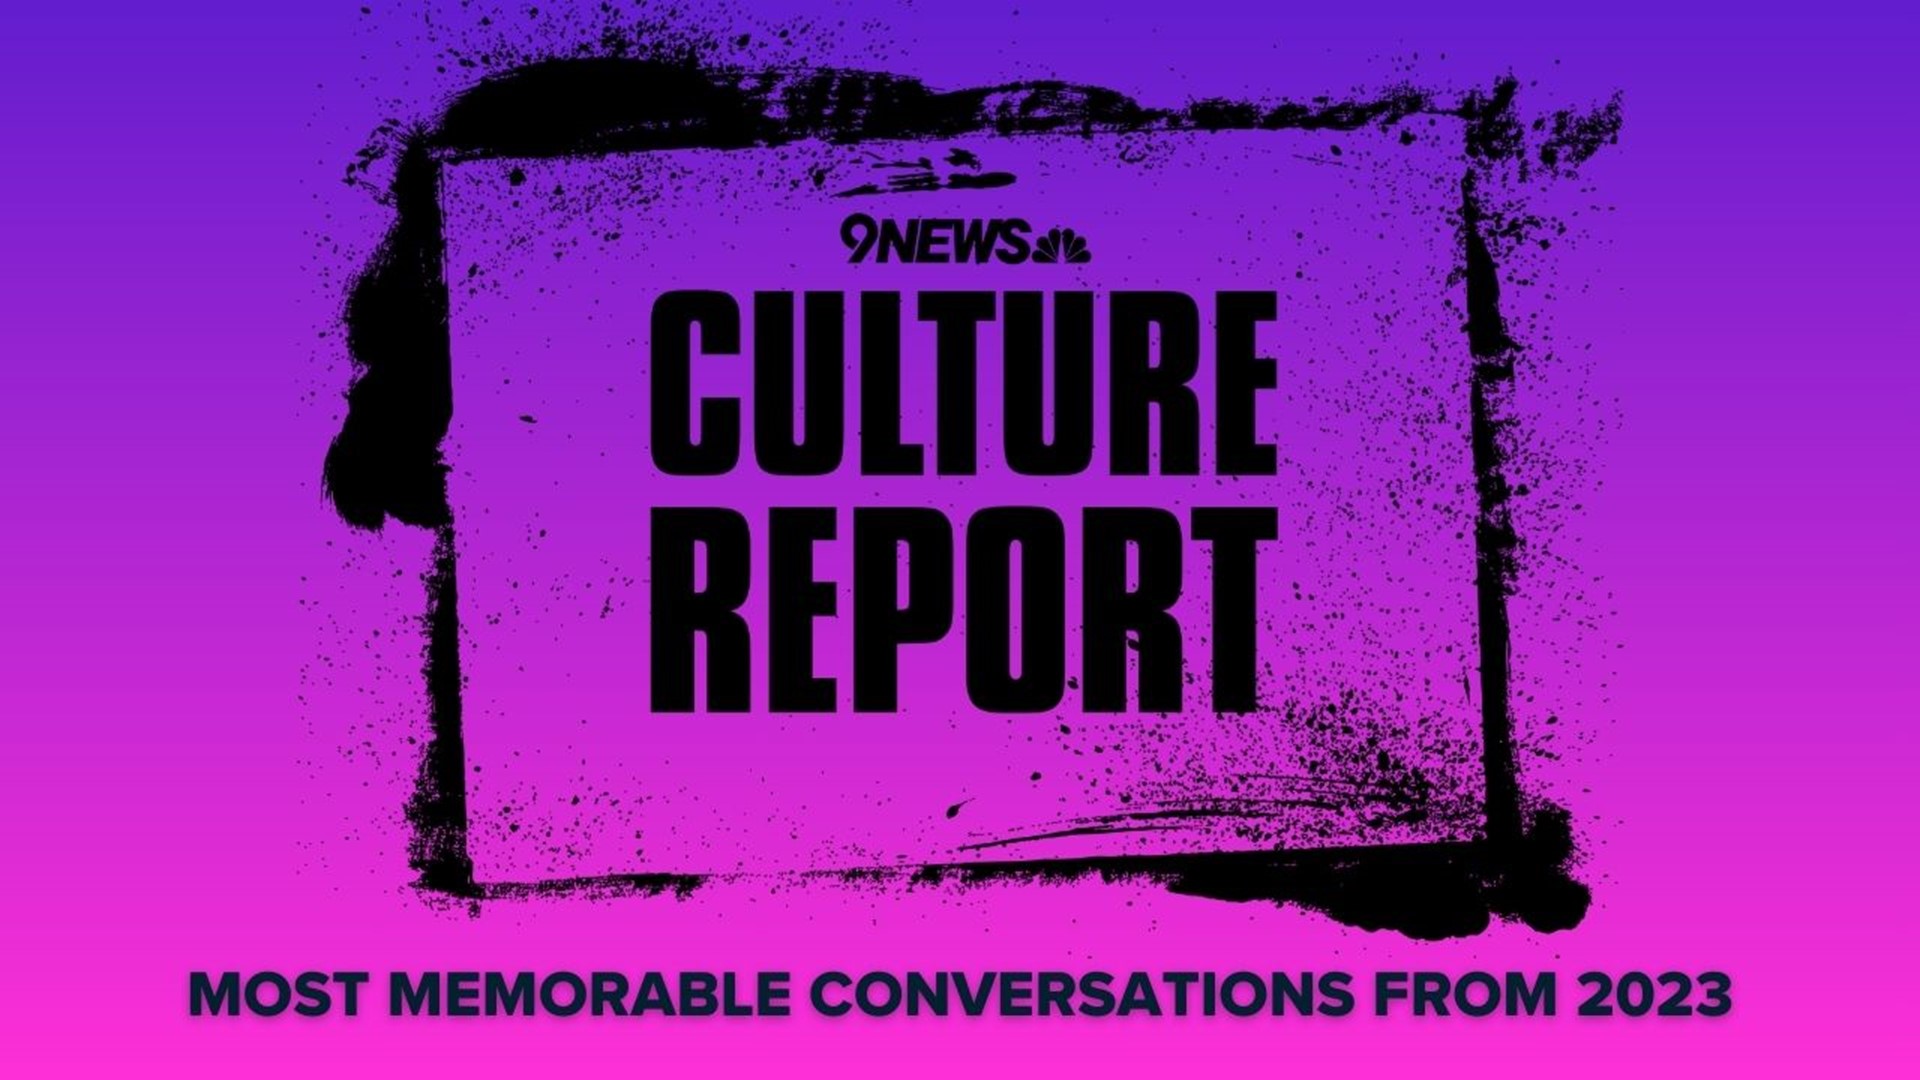 On this week's episode of the Culture Report, we take a look back at more of our favorite conversations from 2023, so far.